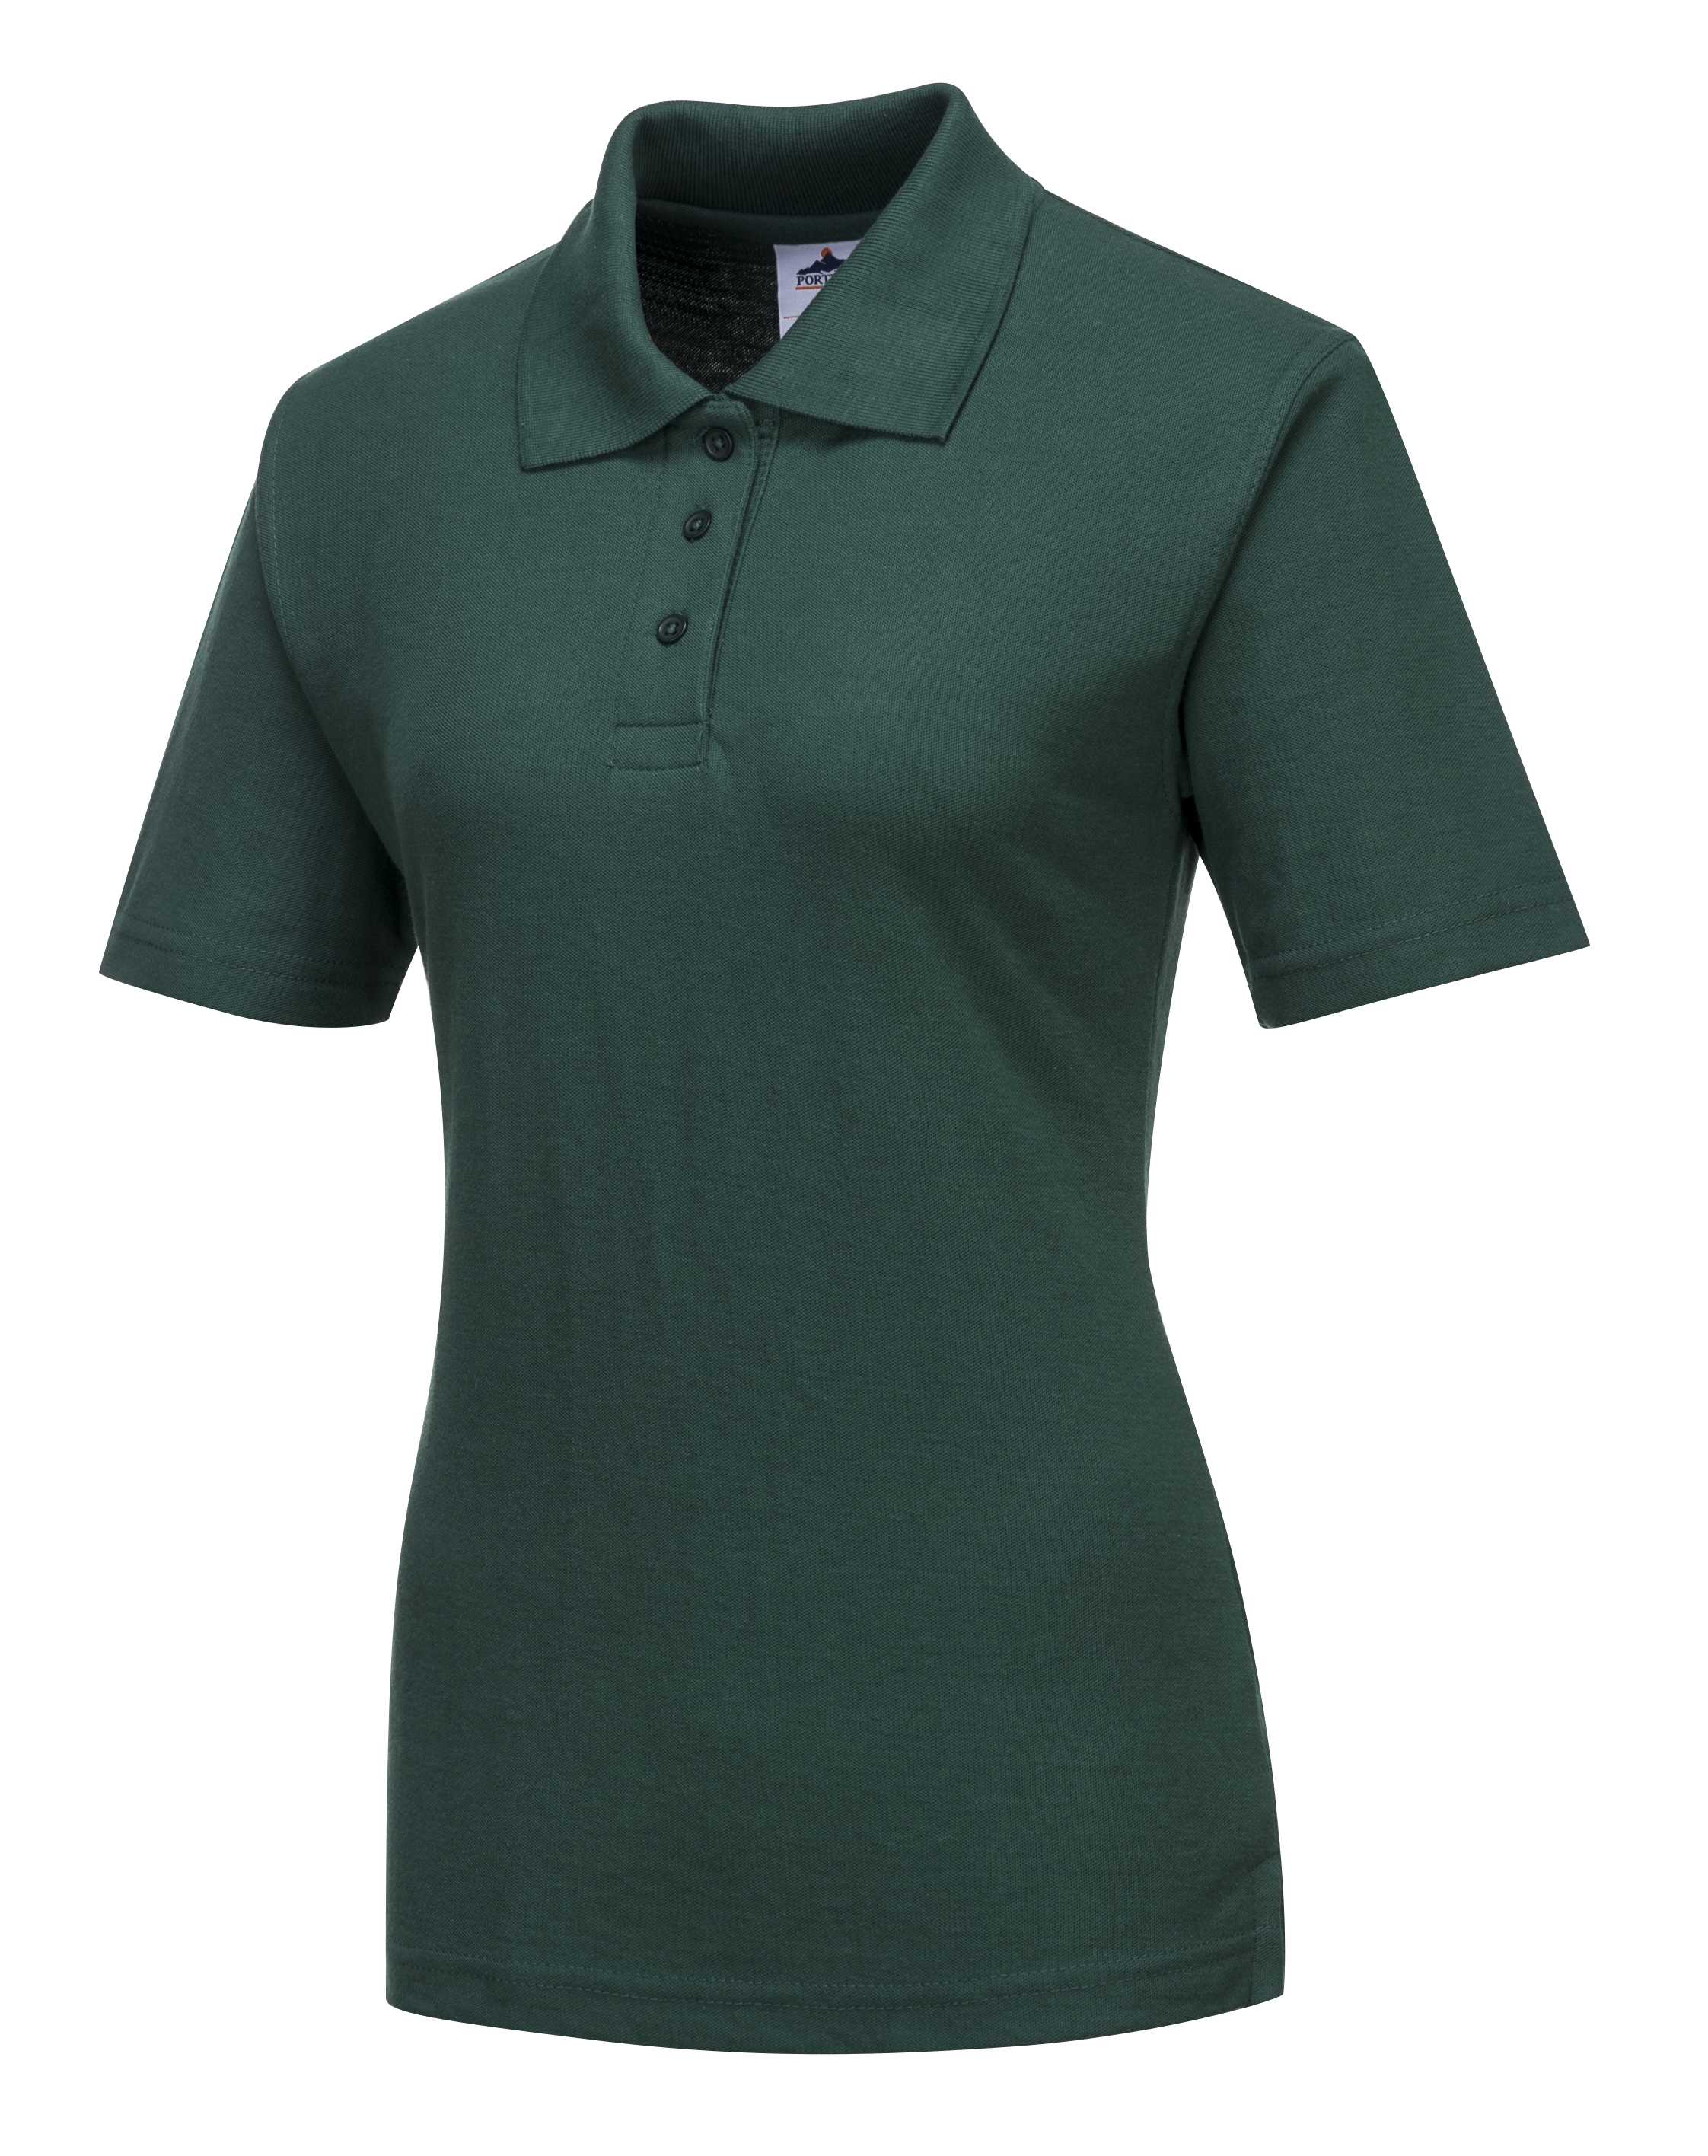 ax-httpss3.eu-west-2.amazonaws.comwebsystemstmp_for_downloadportwest-naples-ladies-polo-shirt-bottle-green.jpeg